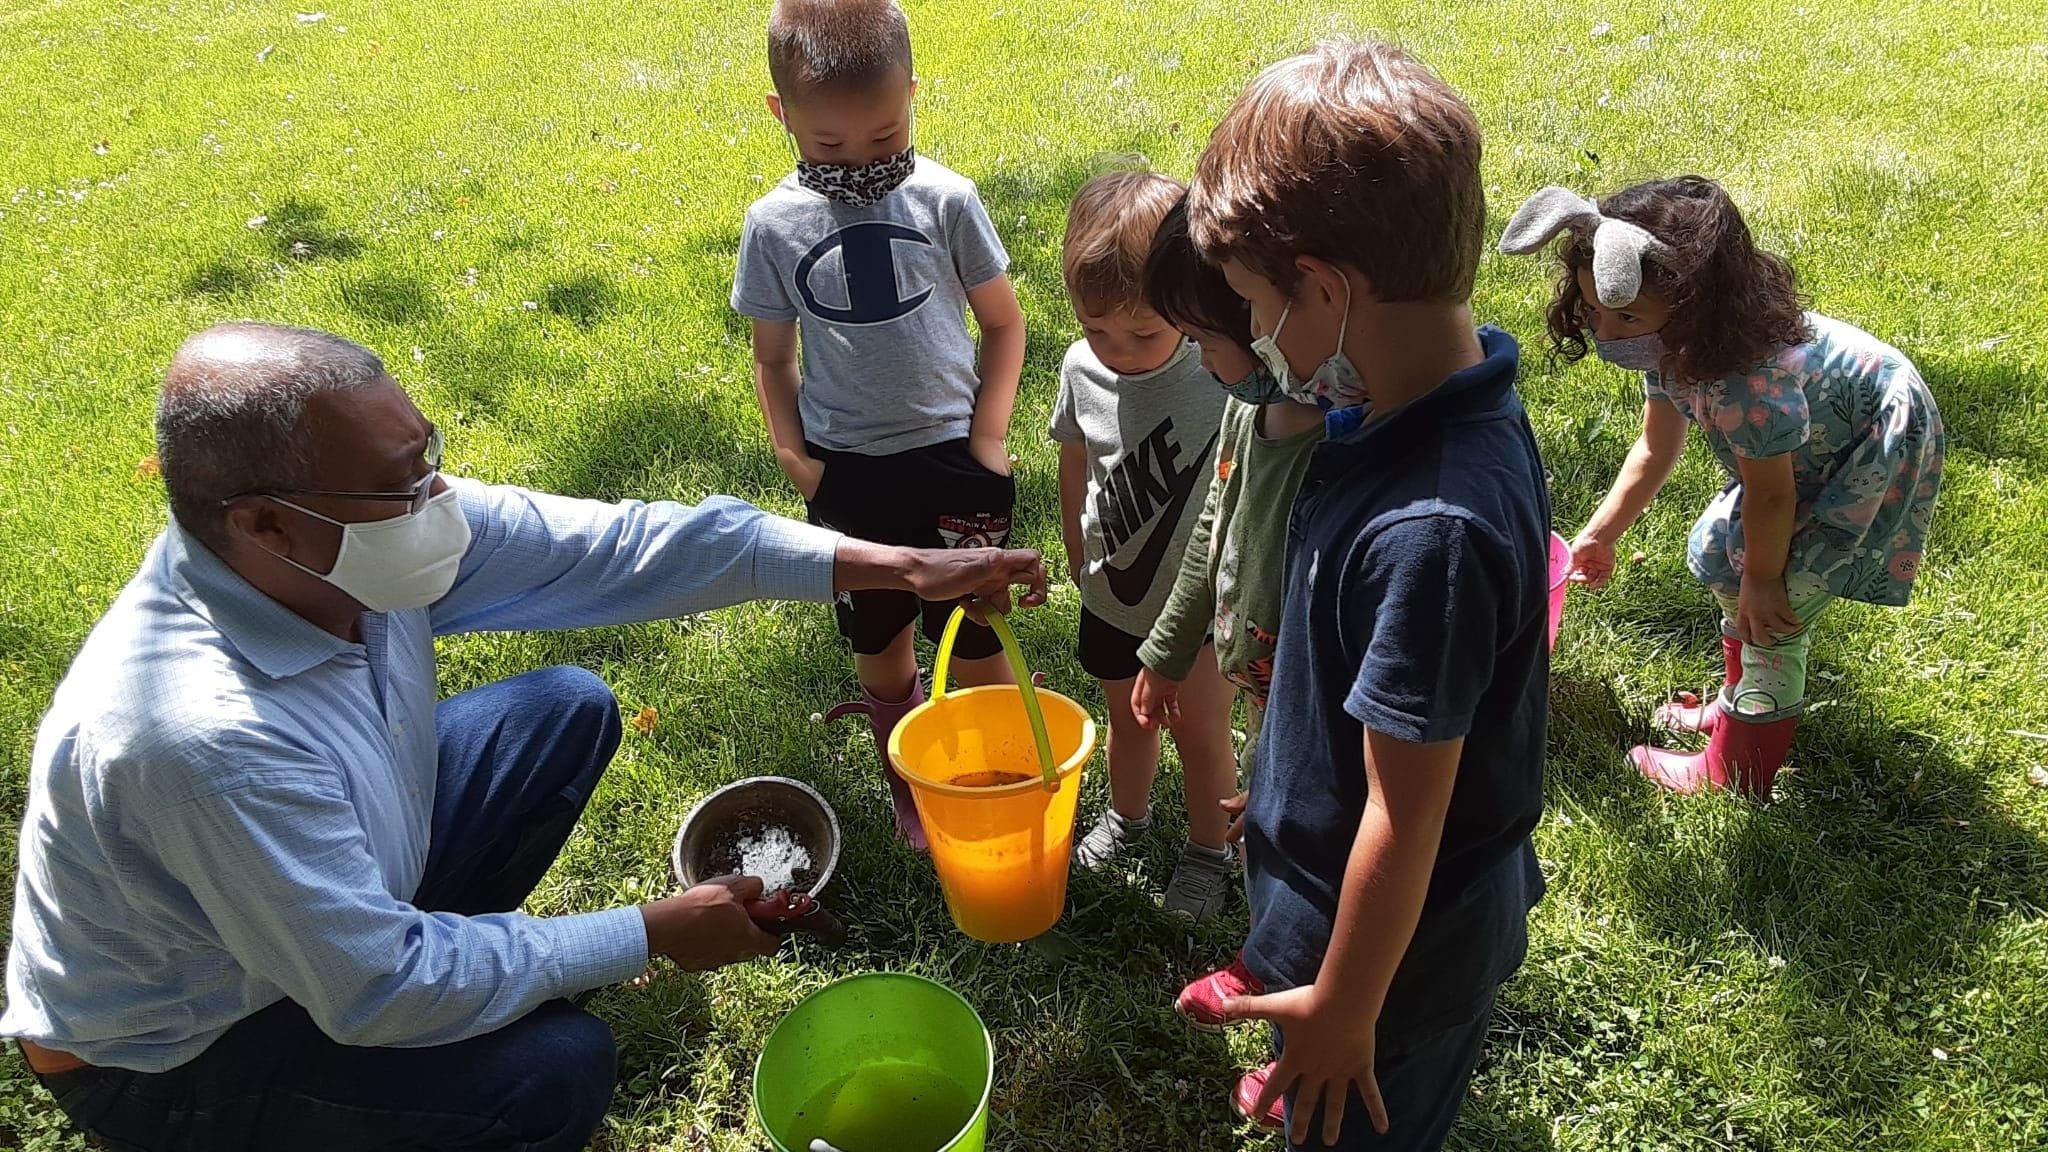 Our MD working with children to use  chicken manure for fertilizing plants. This activity helps children make the interconnections amongst things around them.